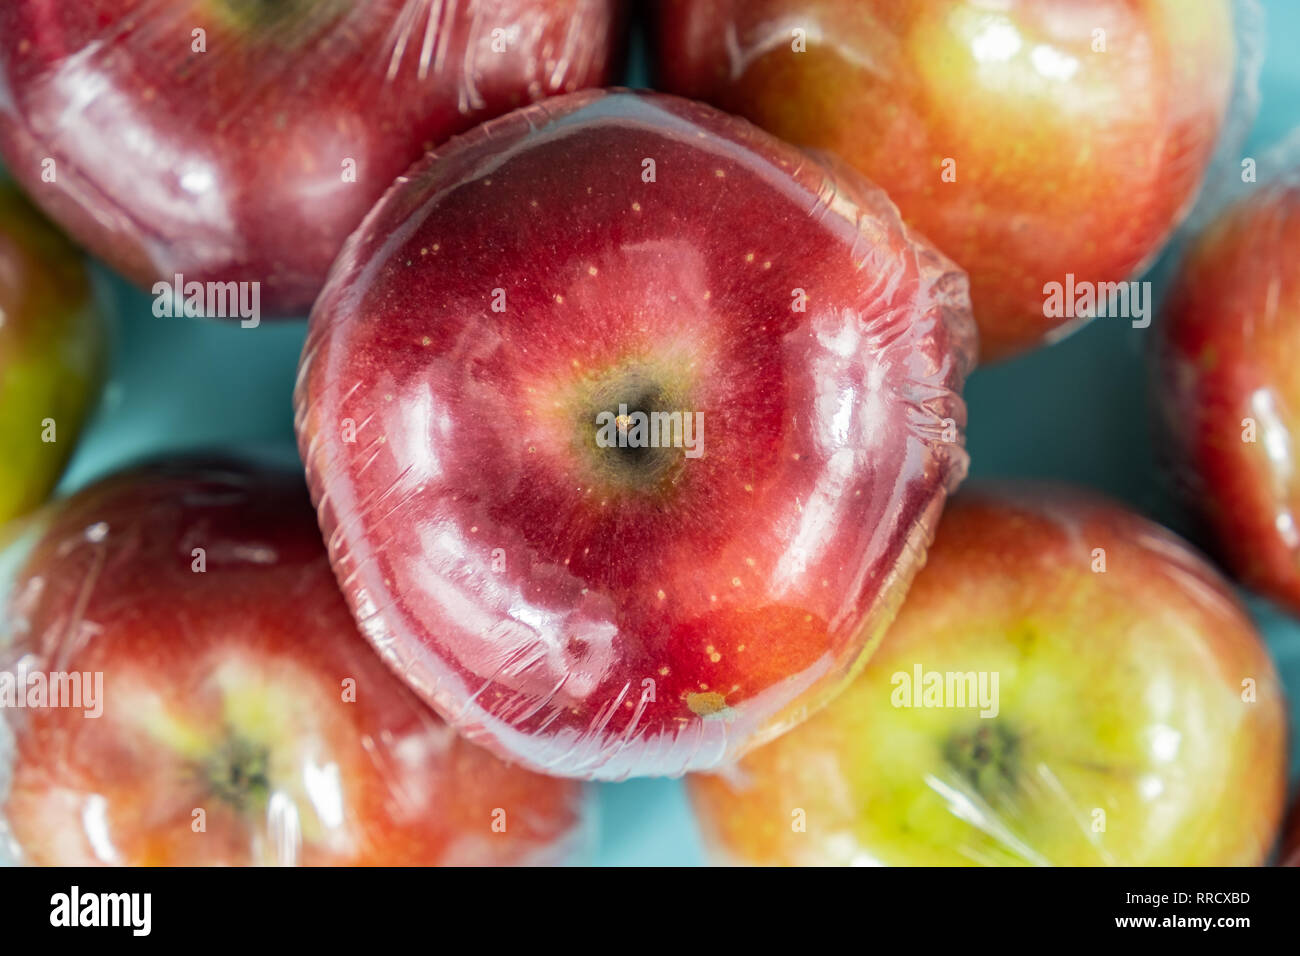 Excessive plastic use concept: fresh apples in kitchen wrap. Unreasonably over-packaged food products: fresh fruit in plastic wrap, close-up view Stock Photo